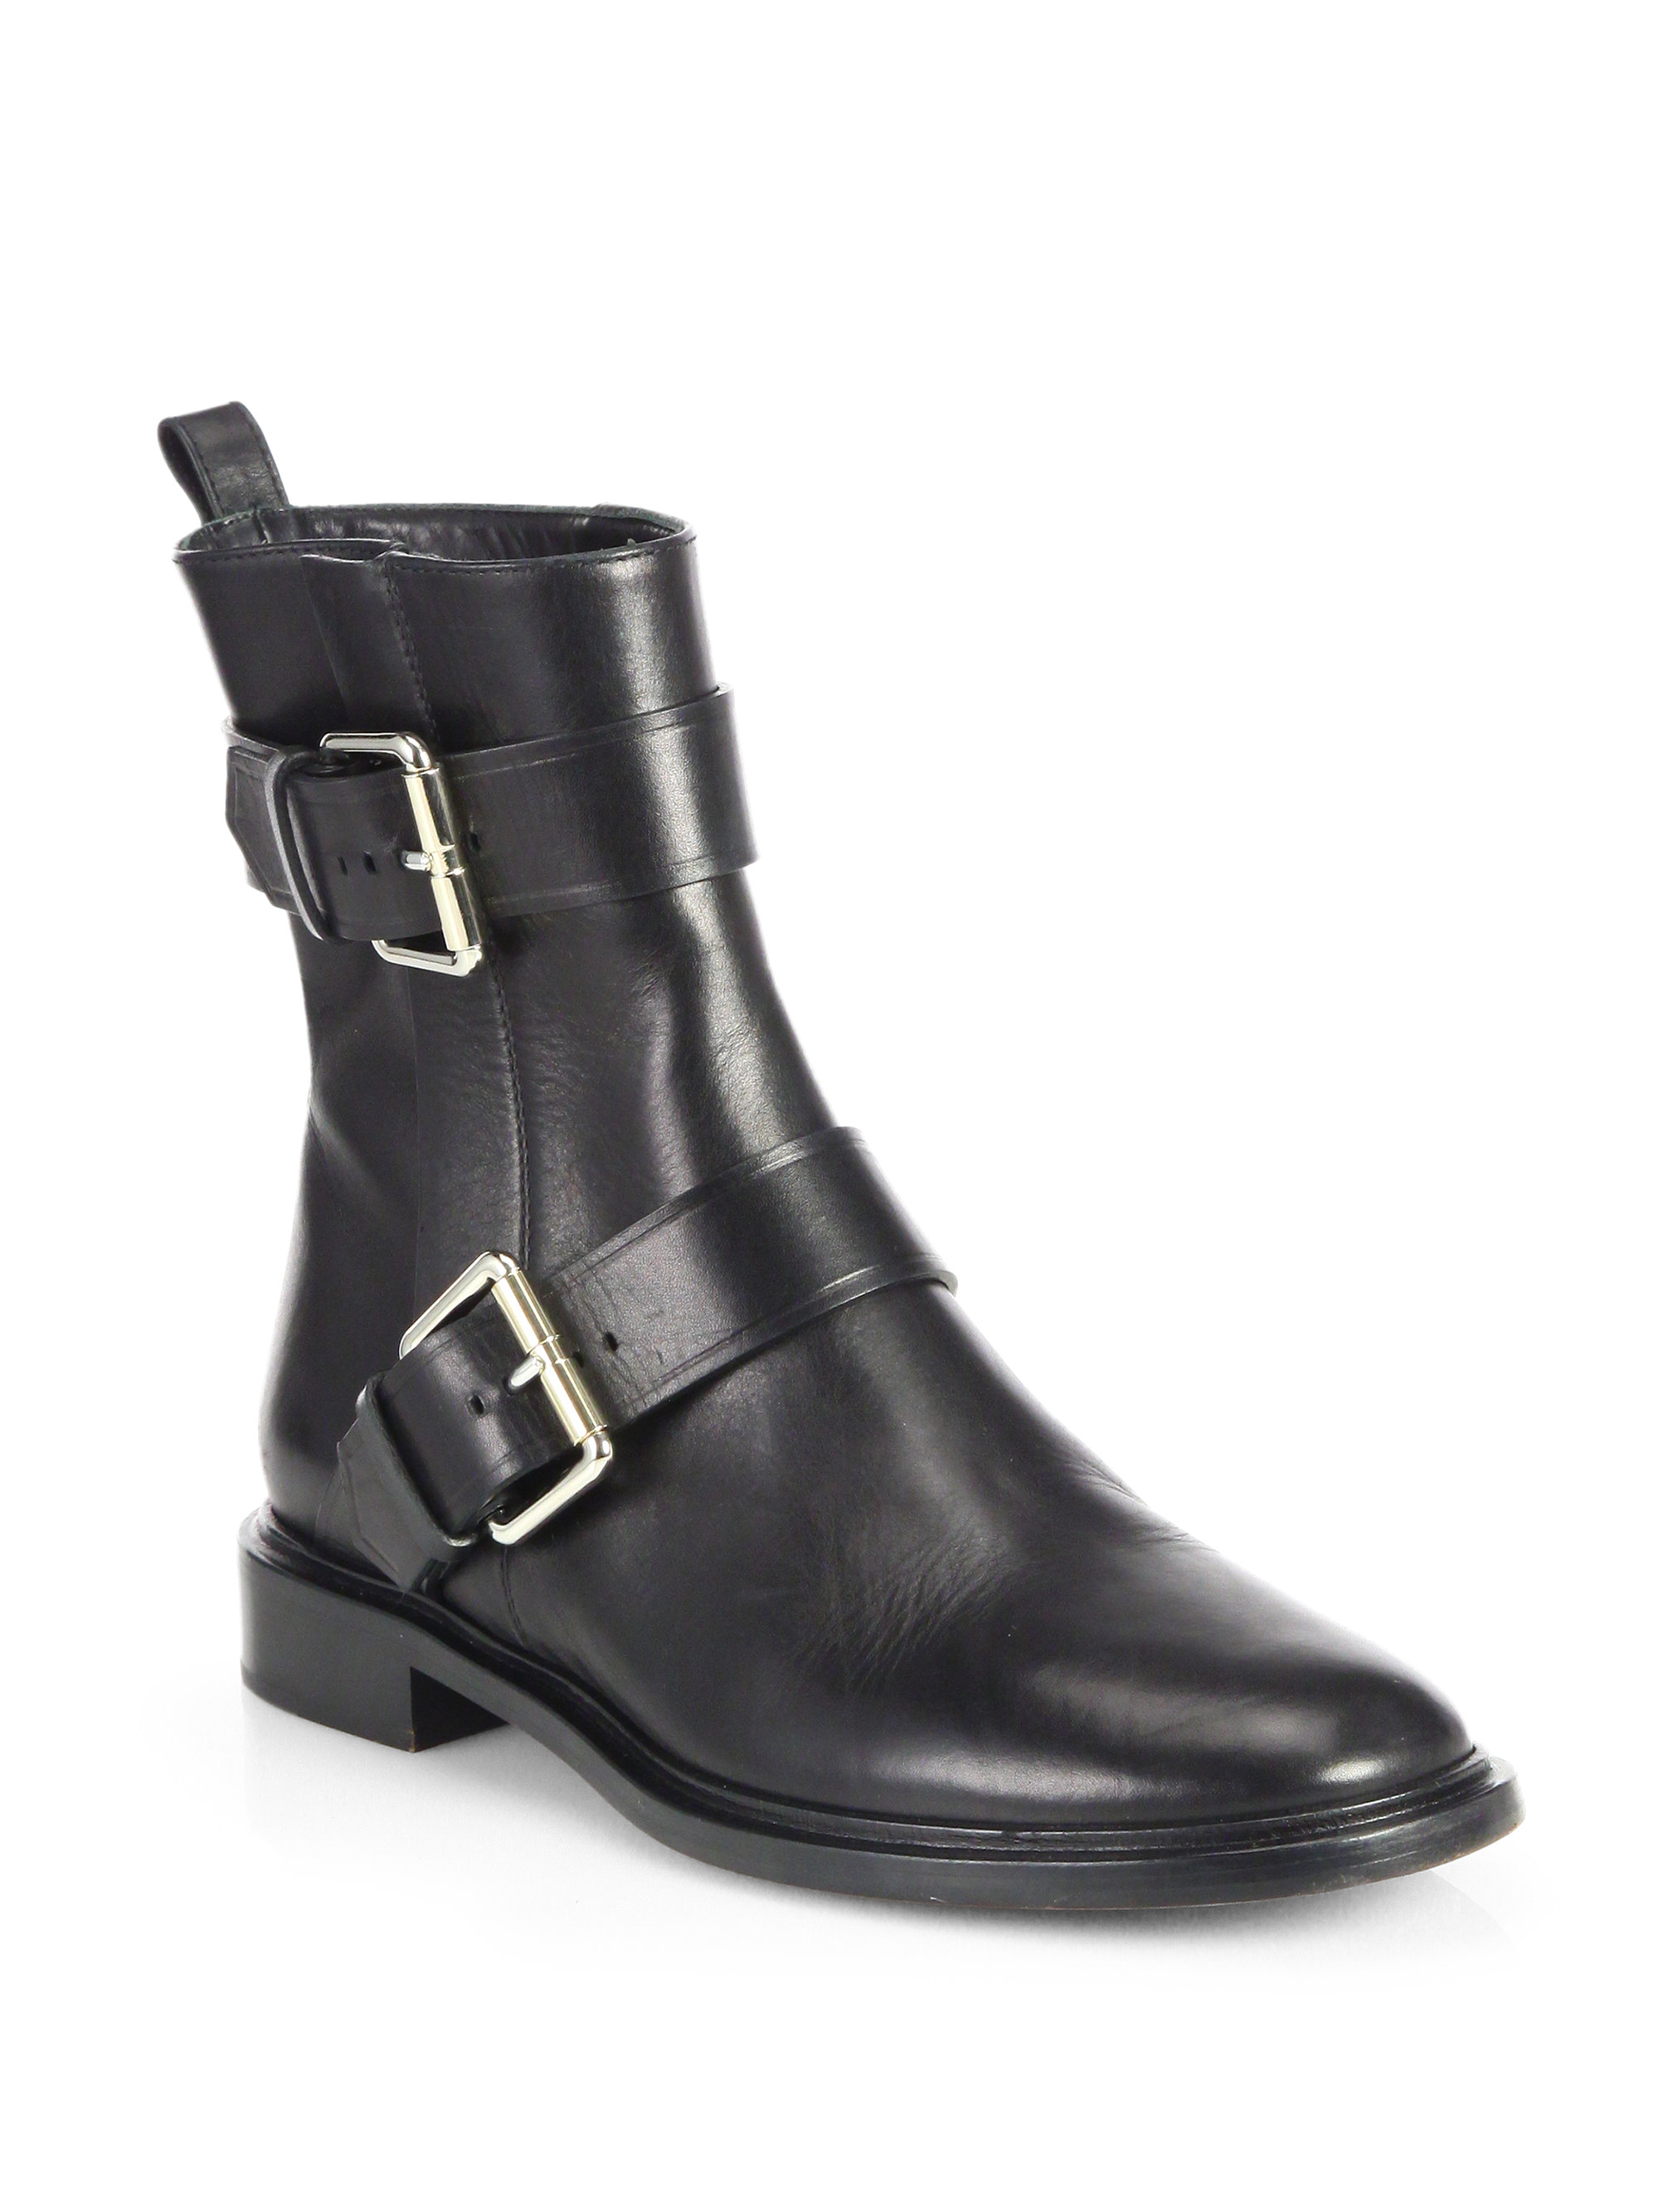 Proenza Schouler Leather Buckle Mid-Calf Moto Boots in Black | Lyst